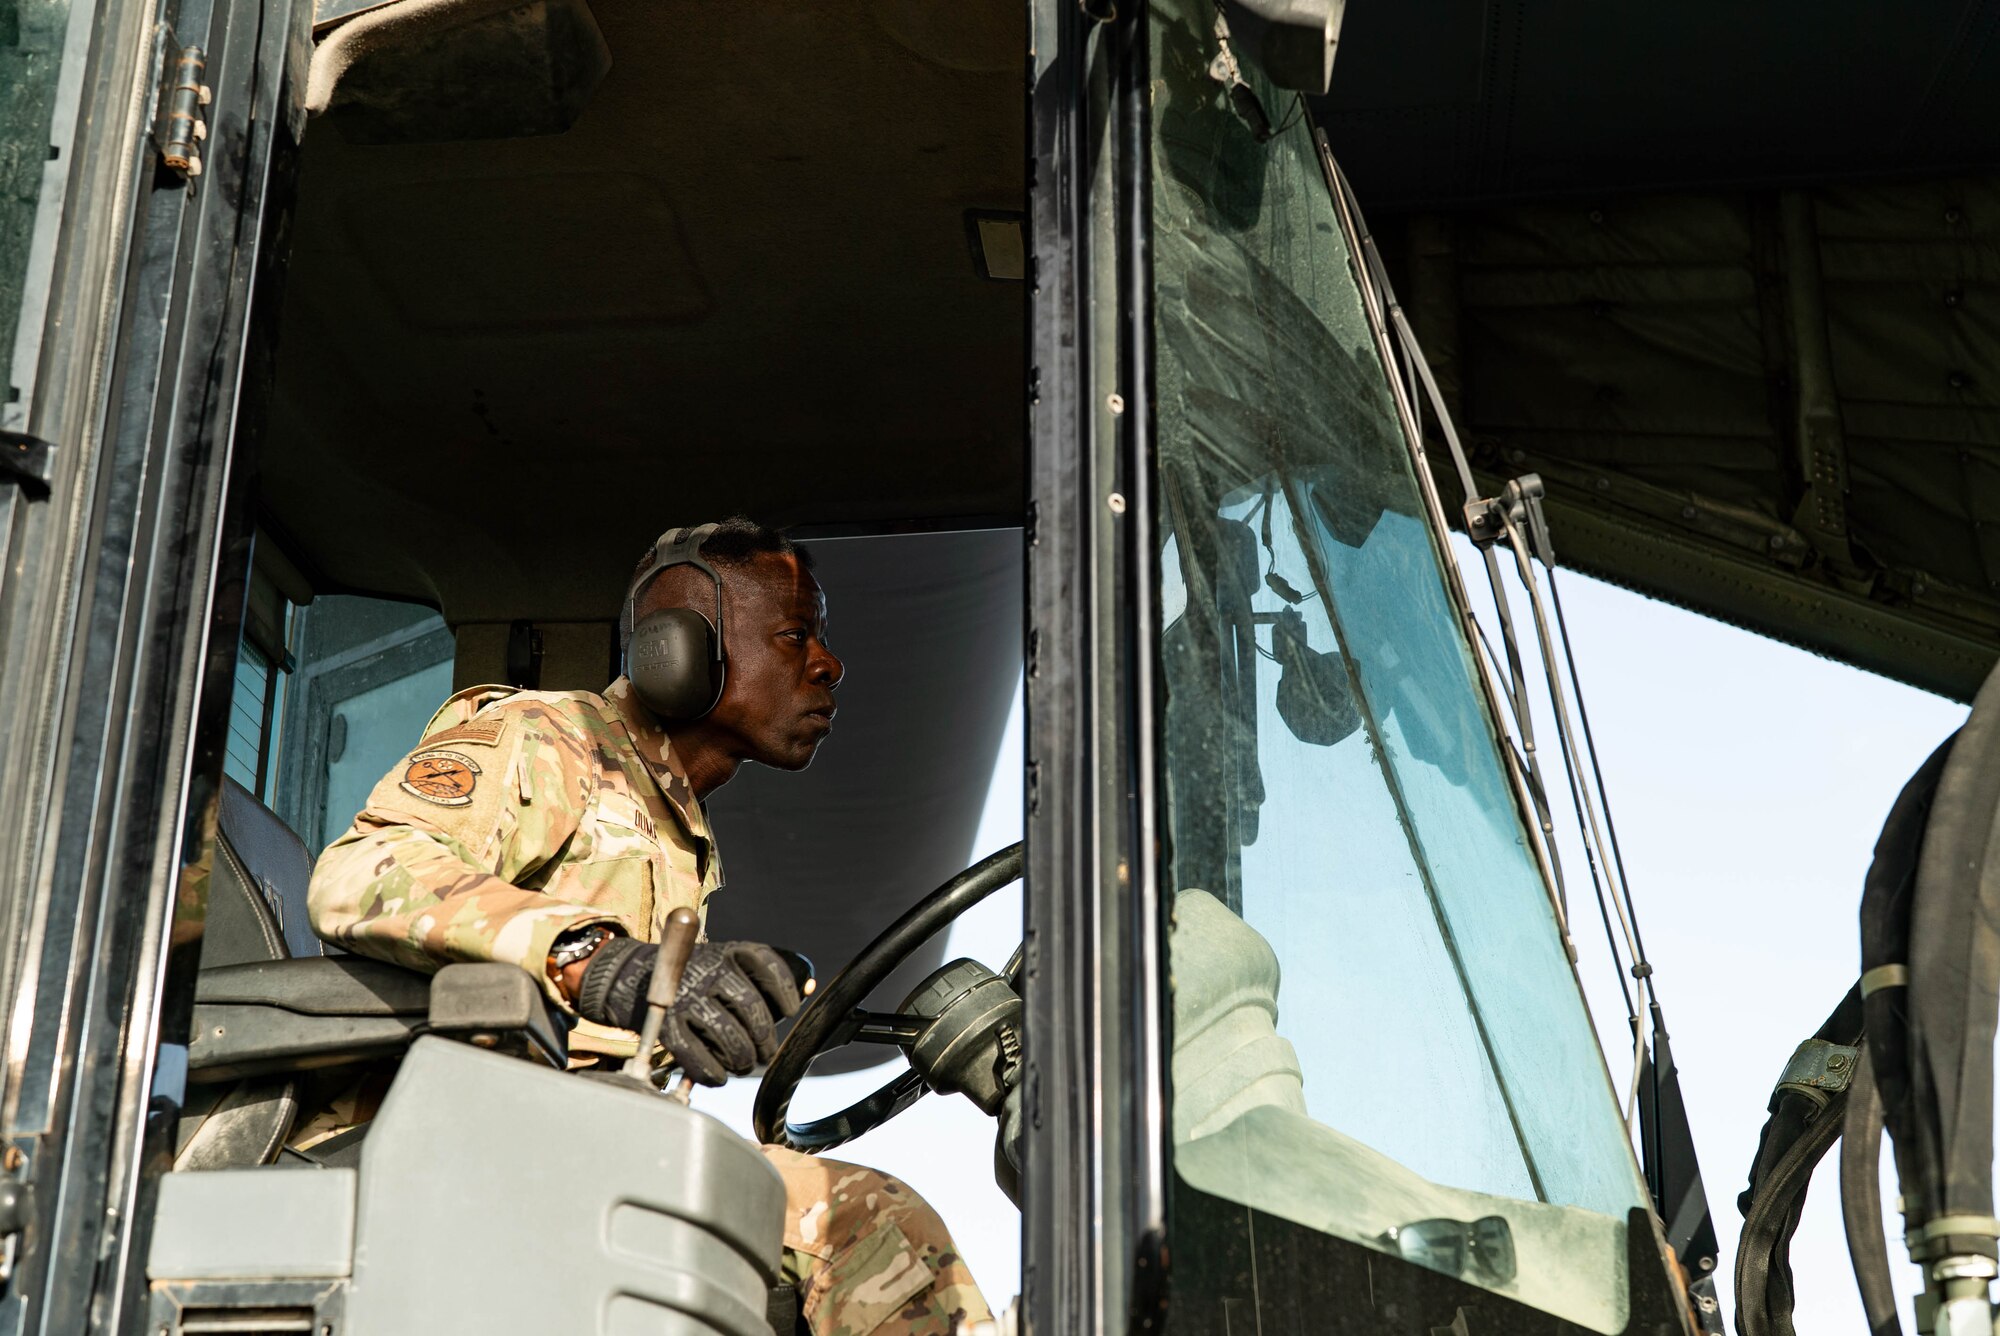 An Airman operates a forklift truck to load pallets of humanitarian aid destined for Gaza onto a C-130.